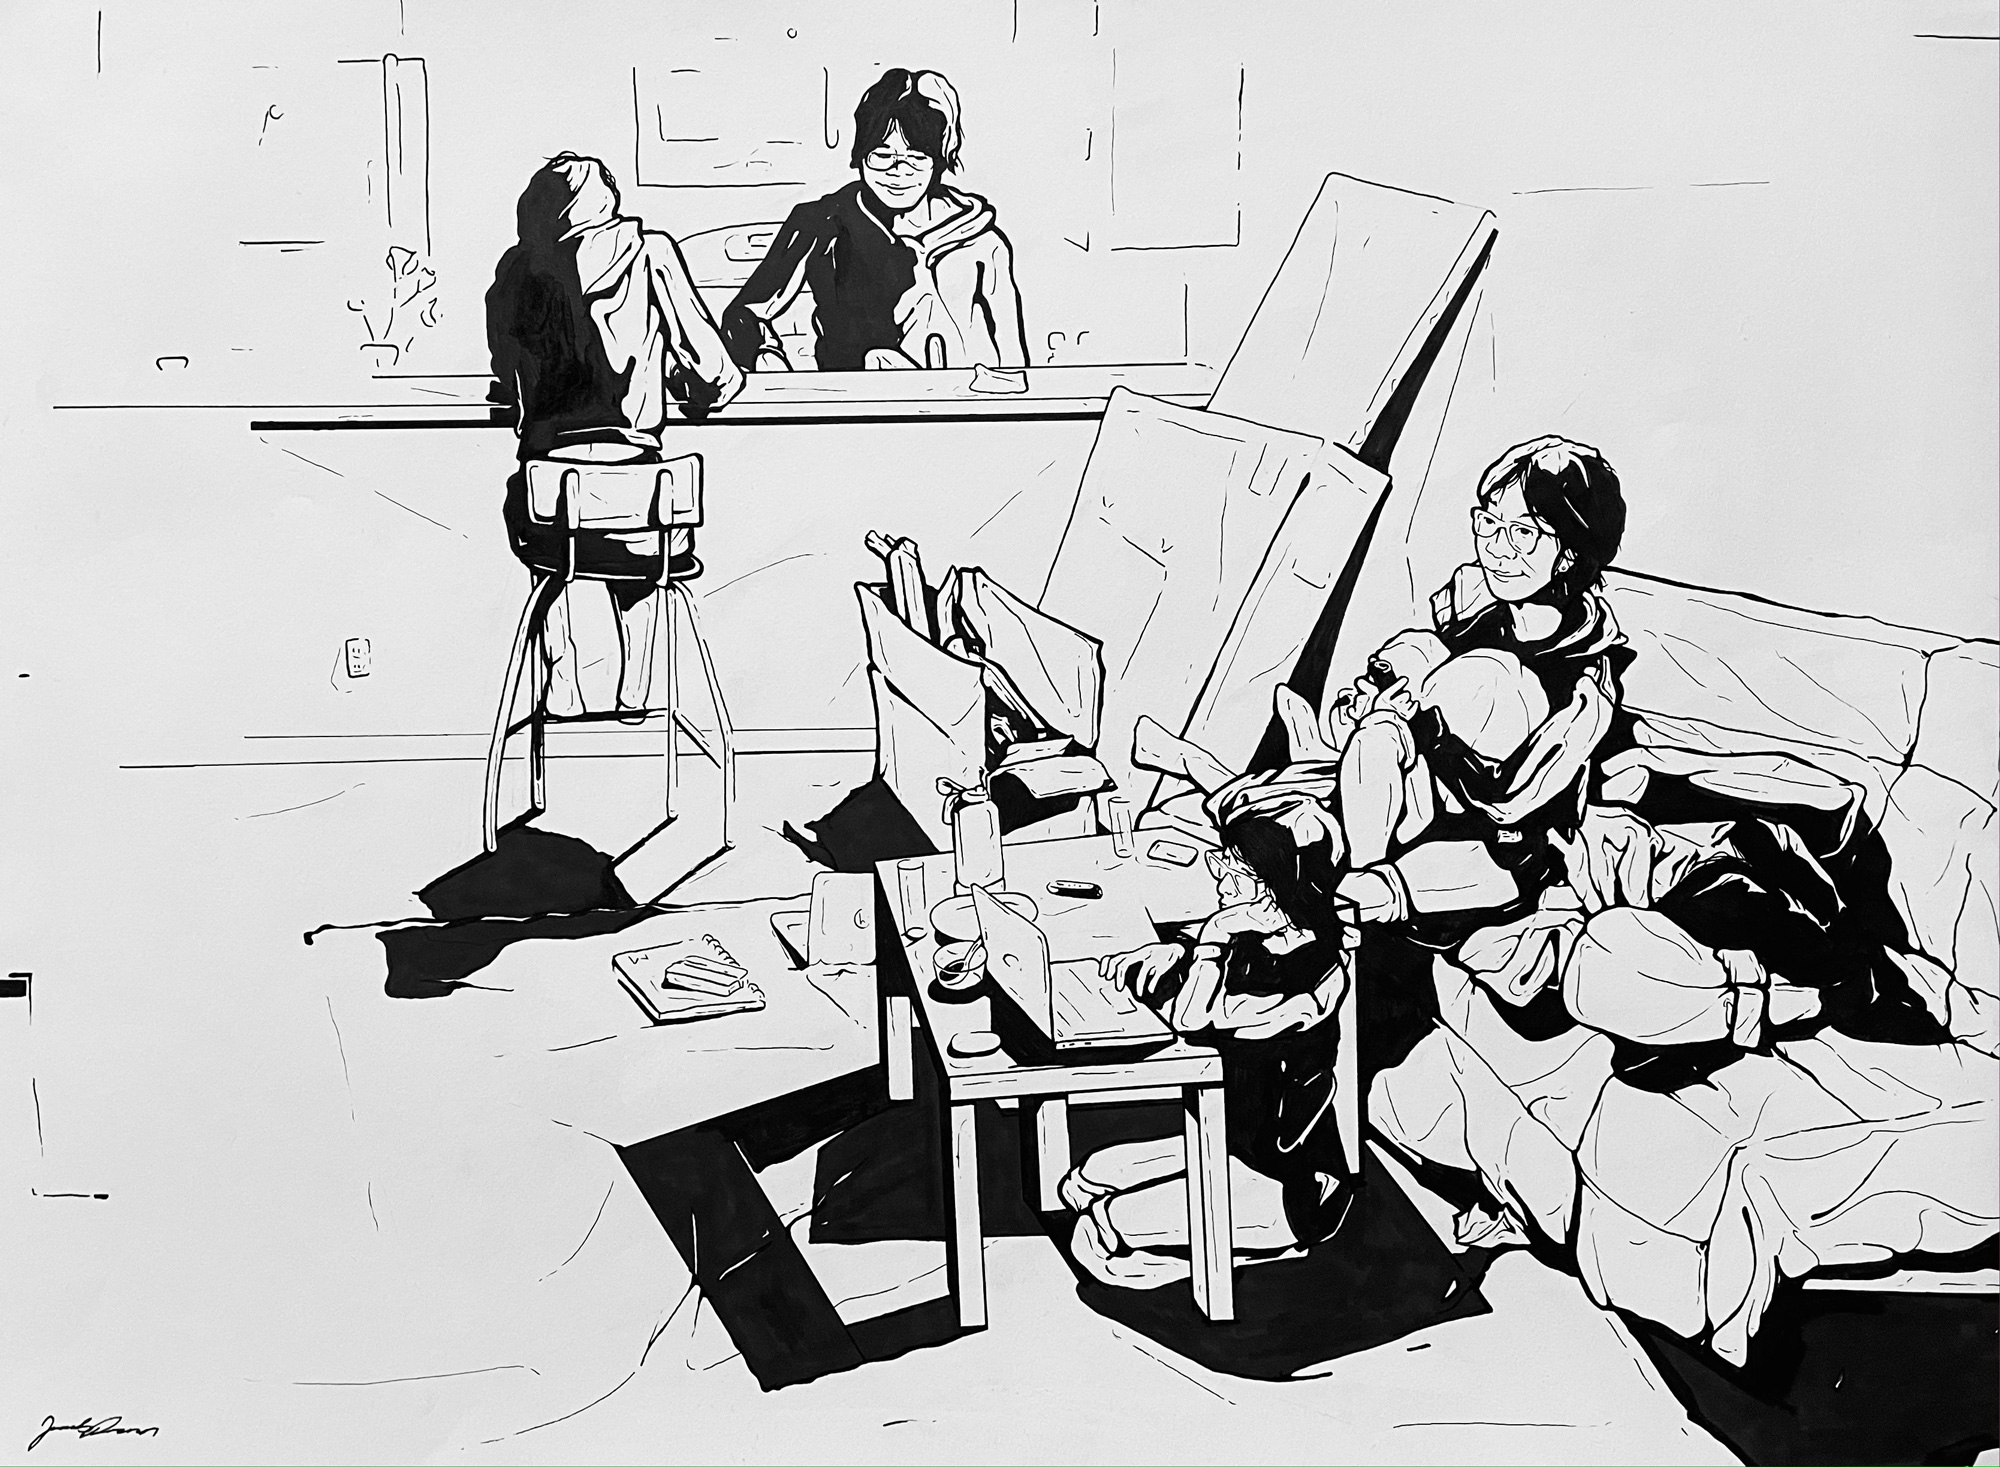 Drawing of a person sitting and interacting in different areas of a space